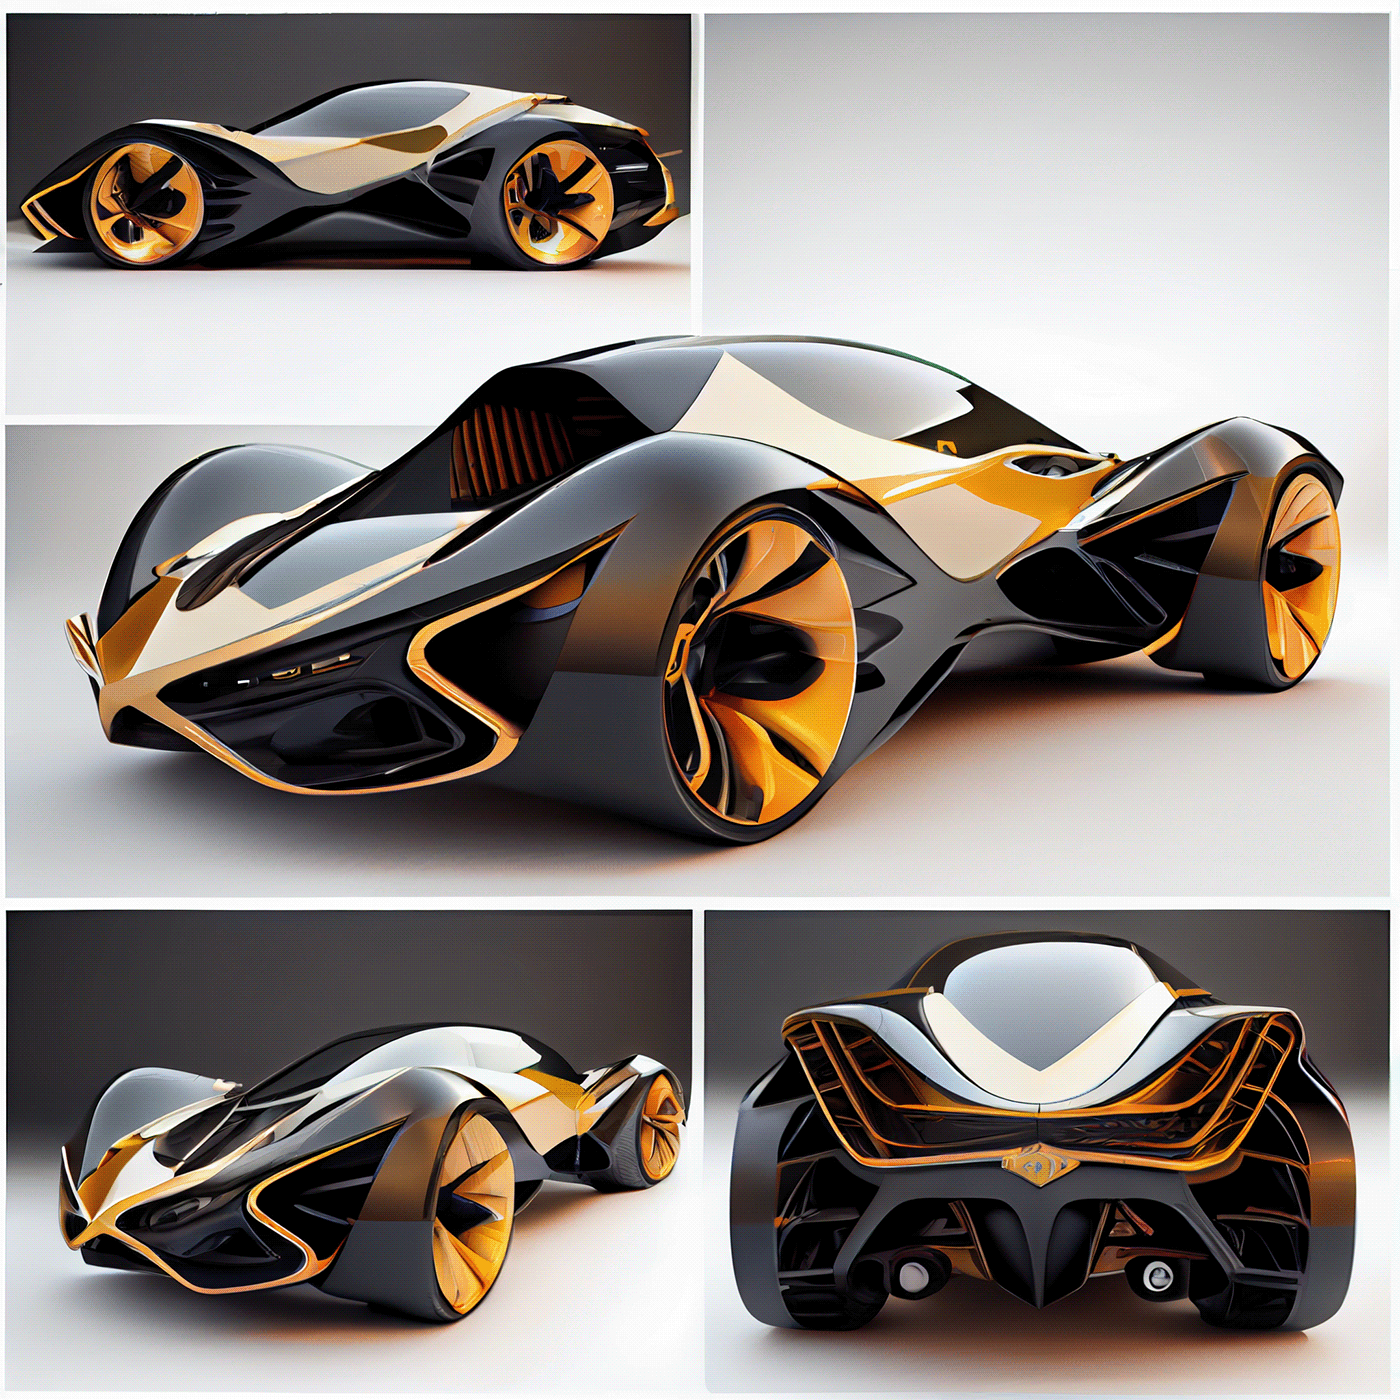 automotive   Bicycle Bike car car design concept Cycling motorcycle sport Vehicle